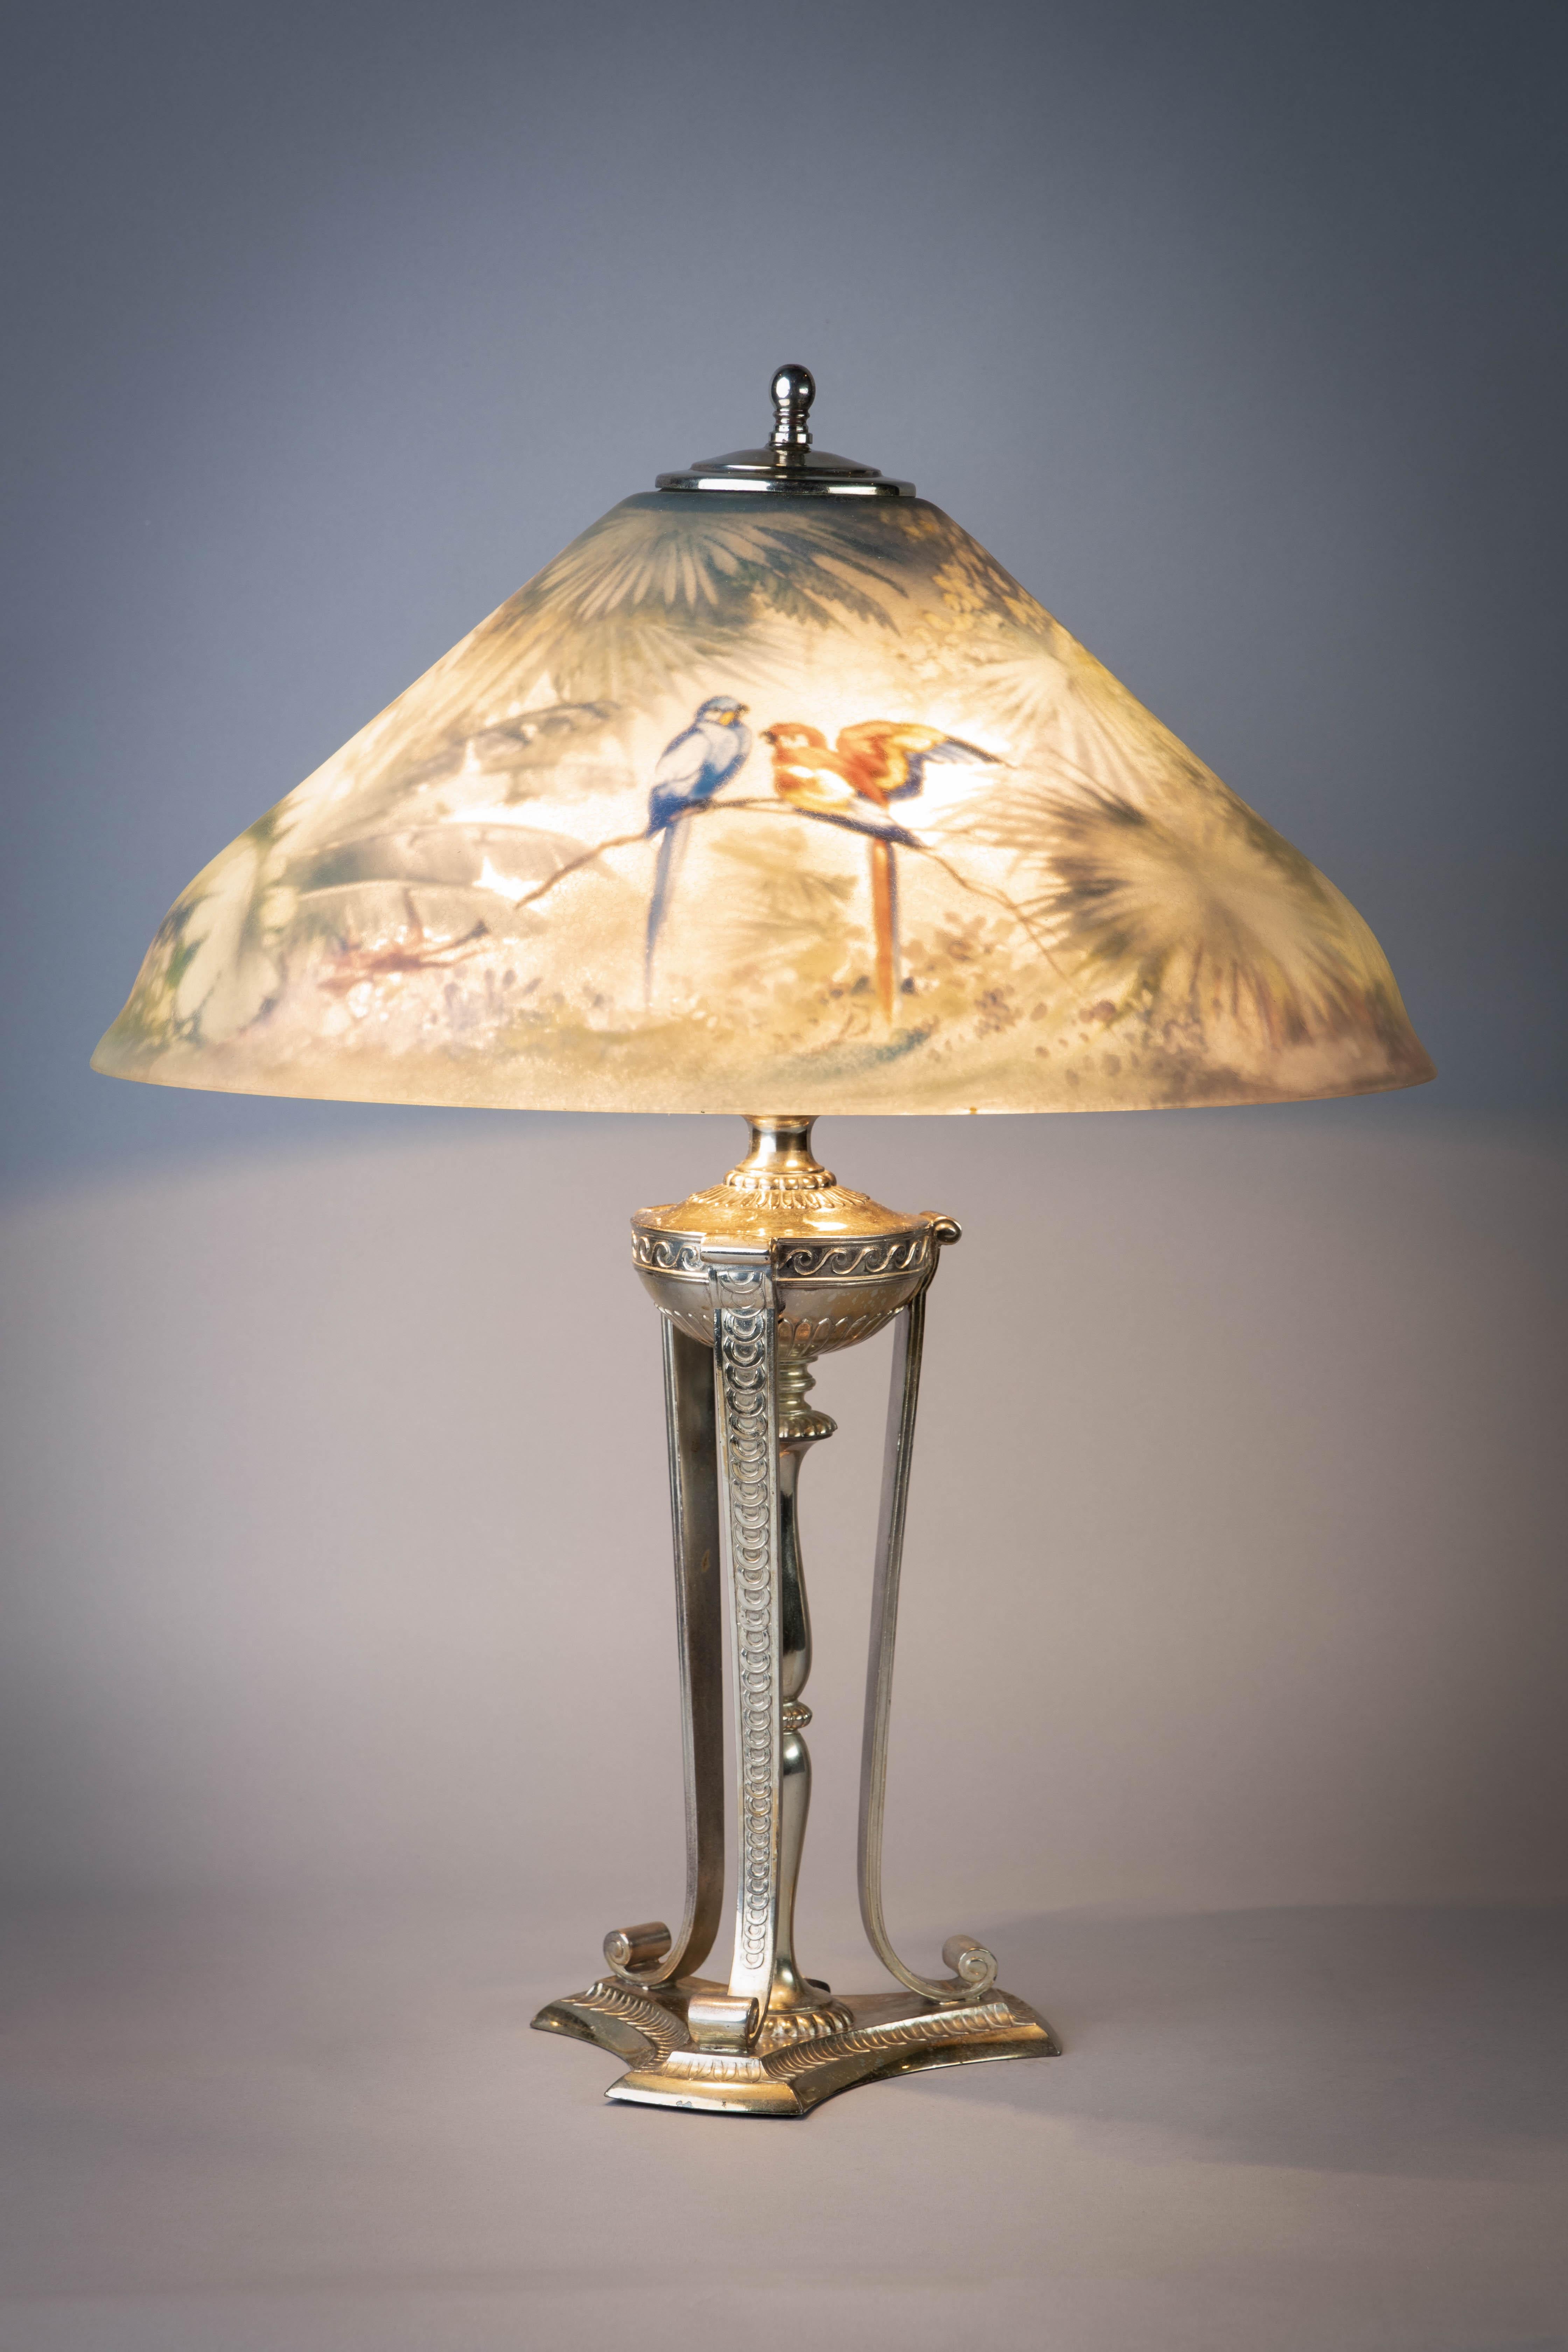 The conical shade decorated with birds perched on tropical branches, three-light socket, on a neoclassical style urn and columnar standard flanked by three pillar supports ending in scrolling feet and a stepped triangular base.